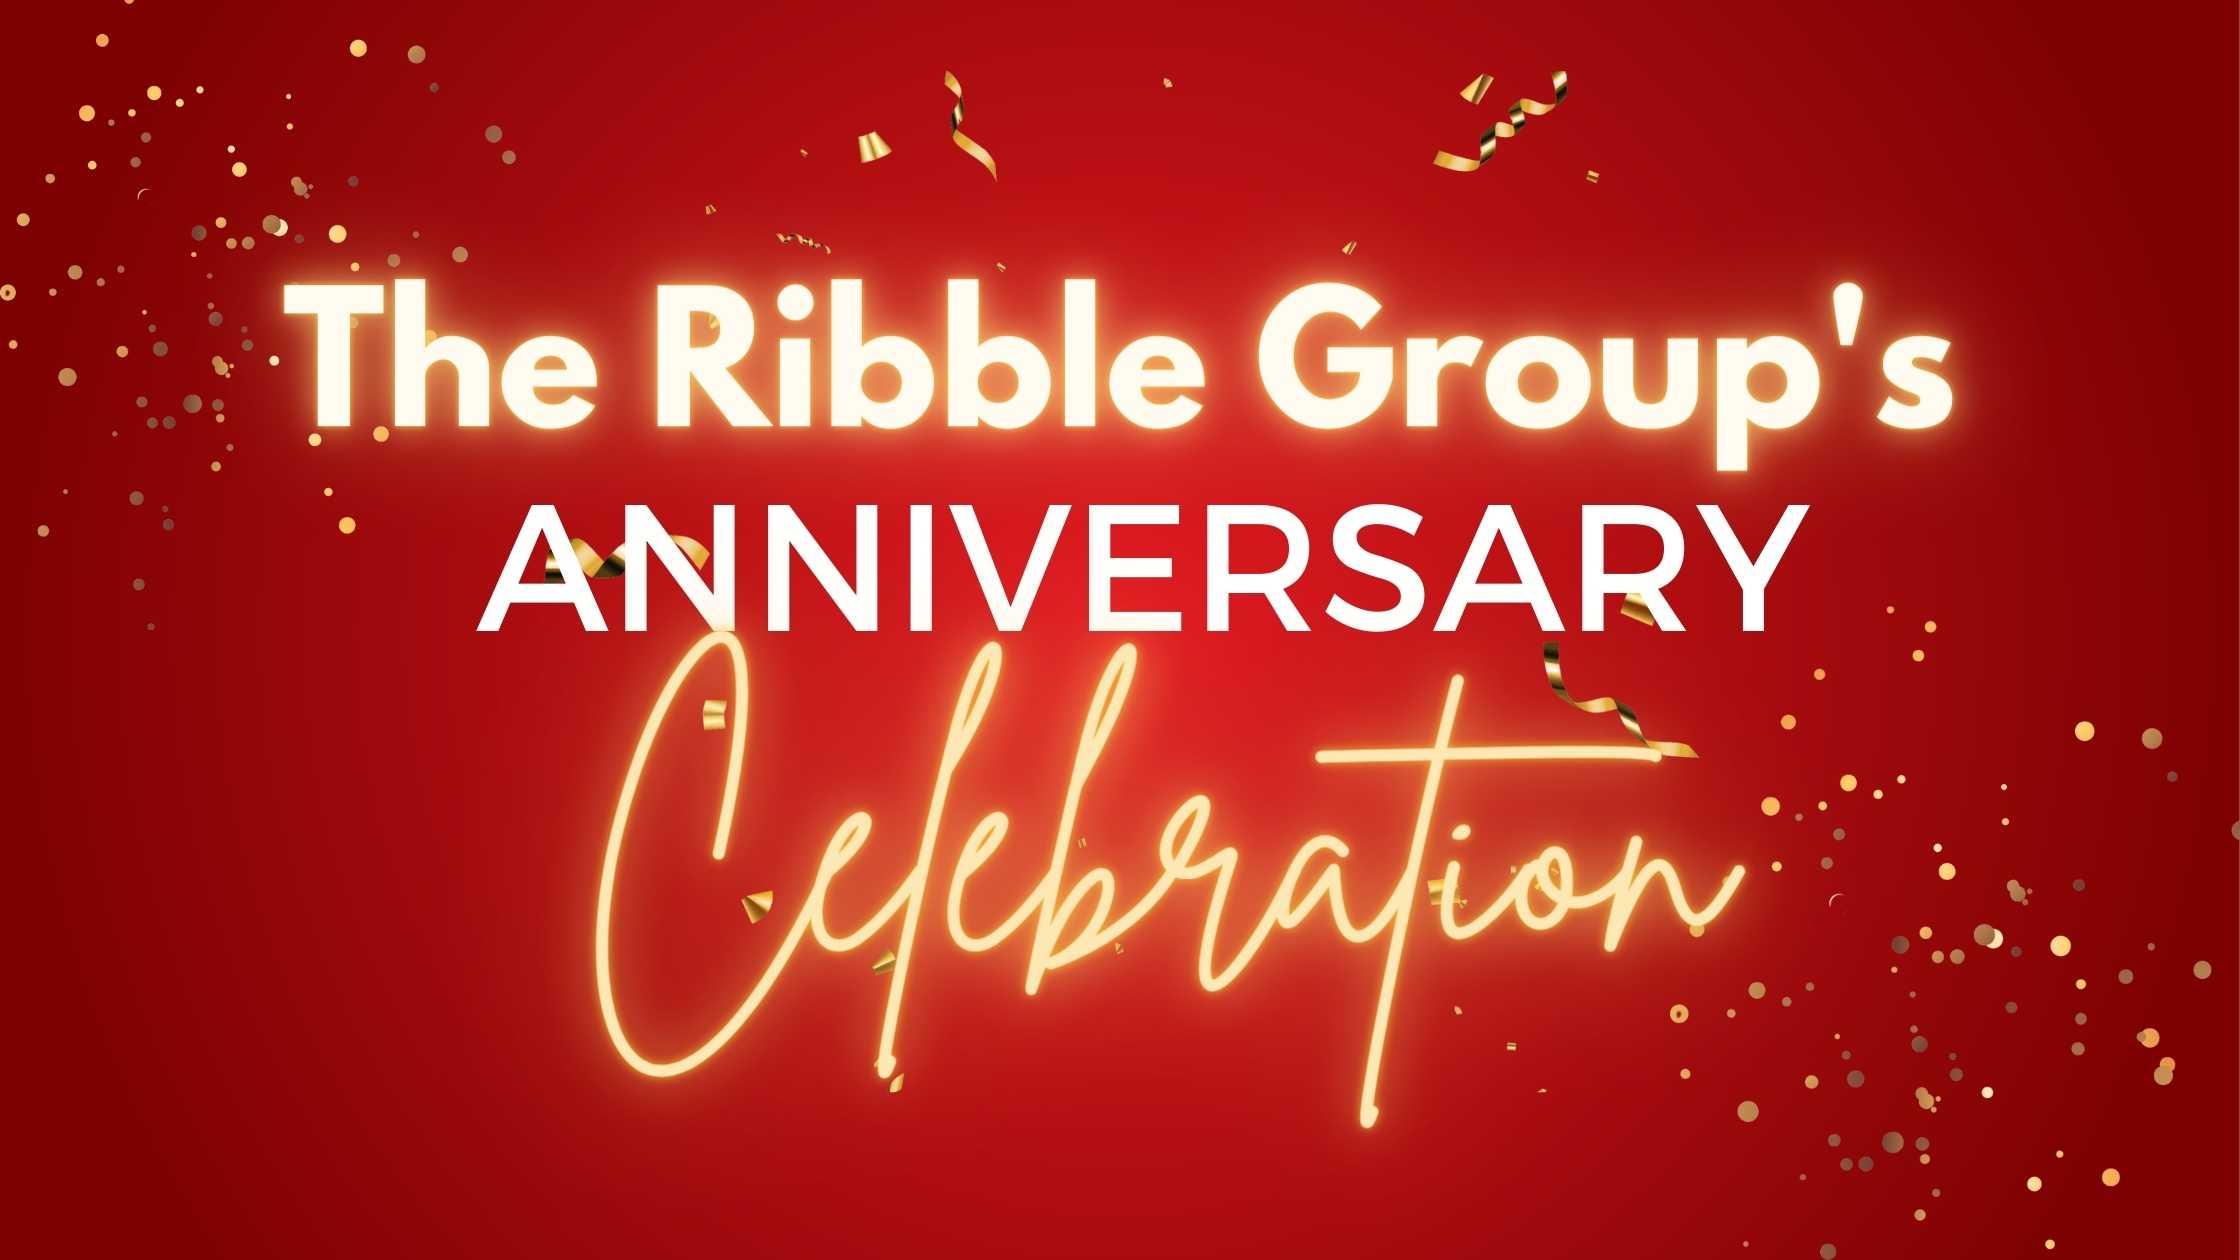 Happy Anniversary to The Ribble Group!